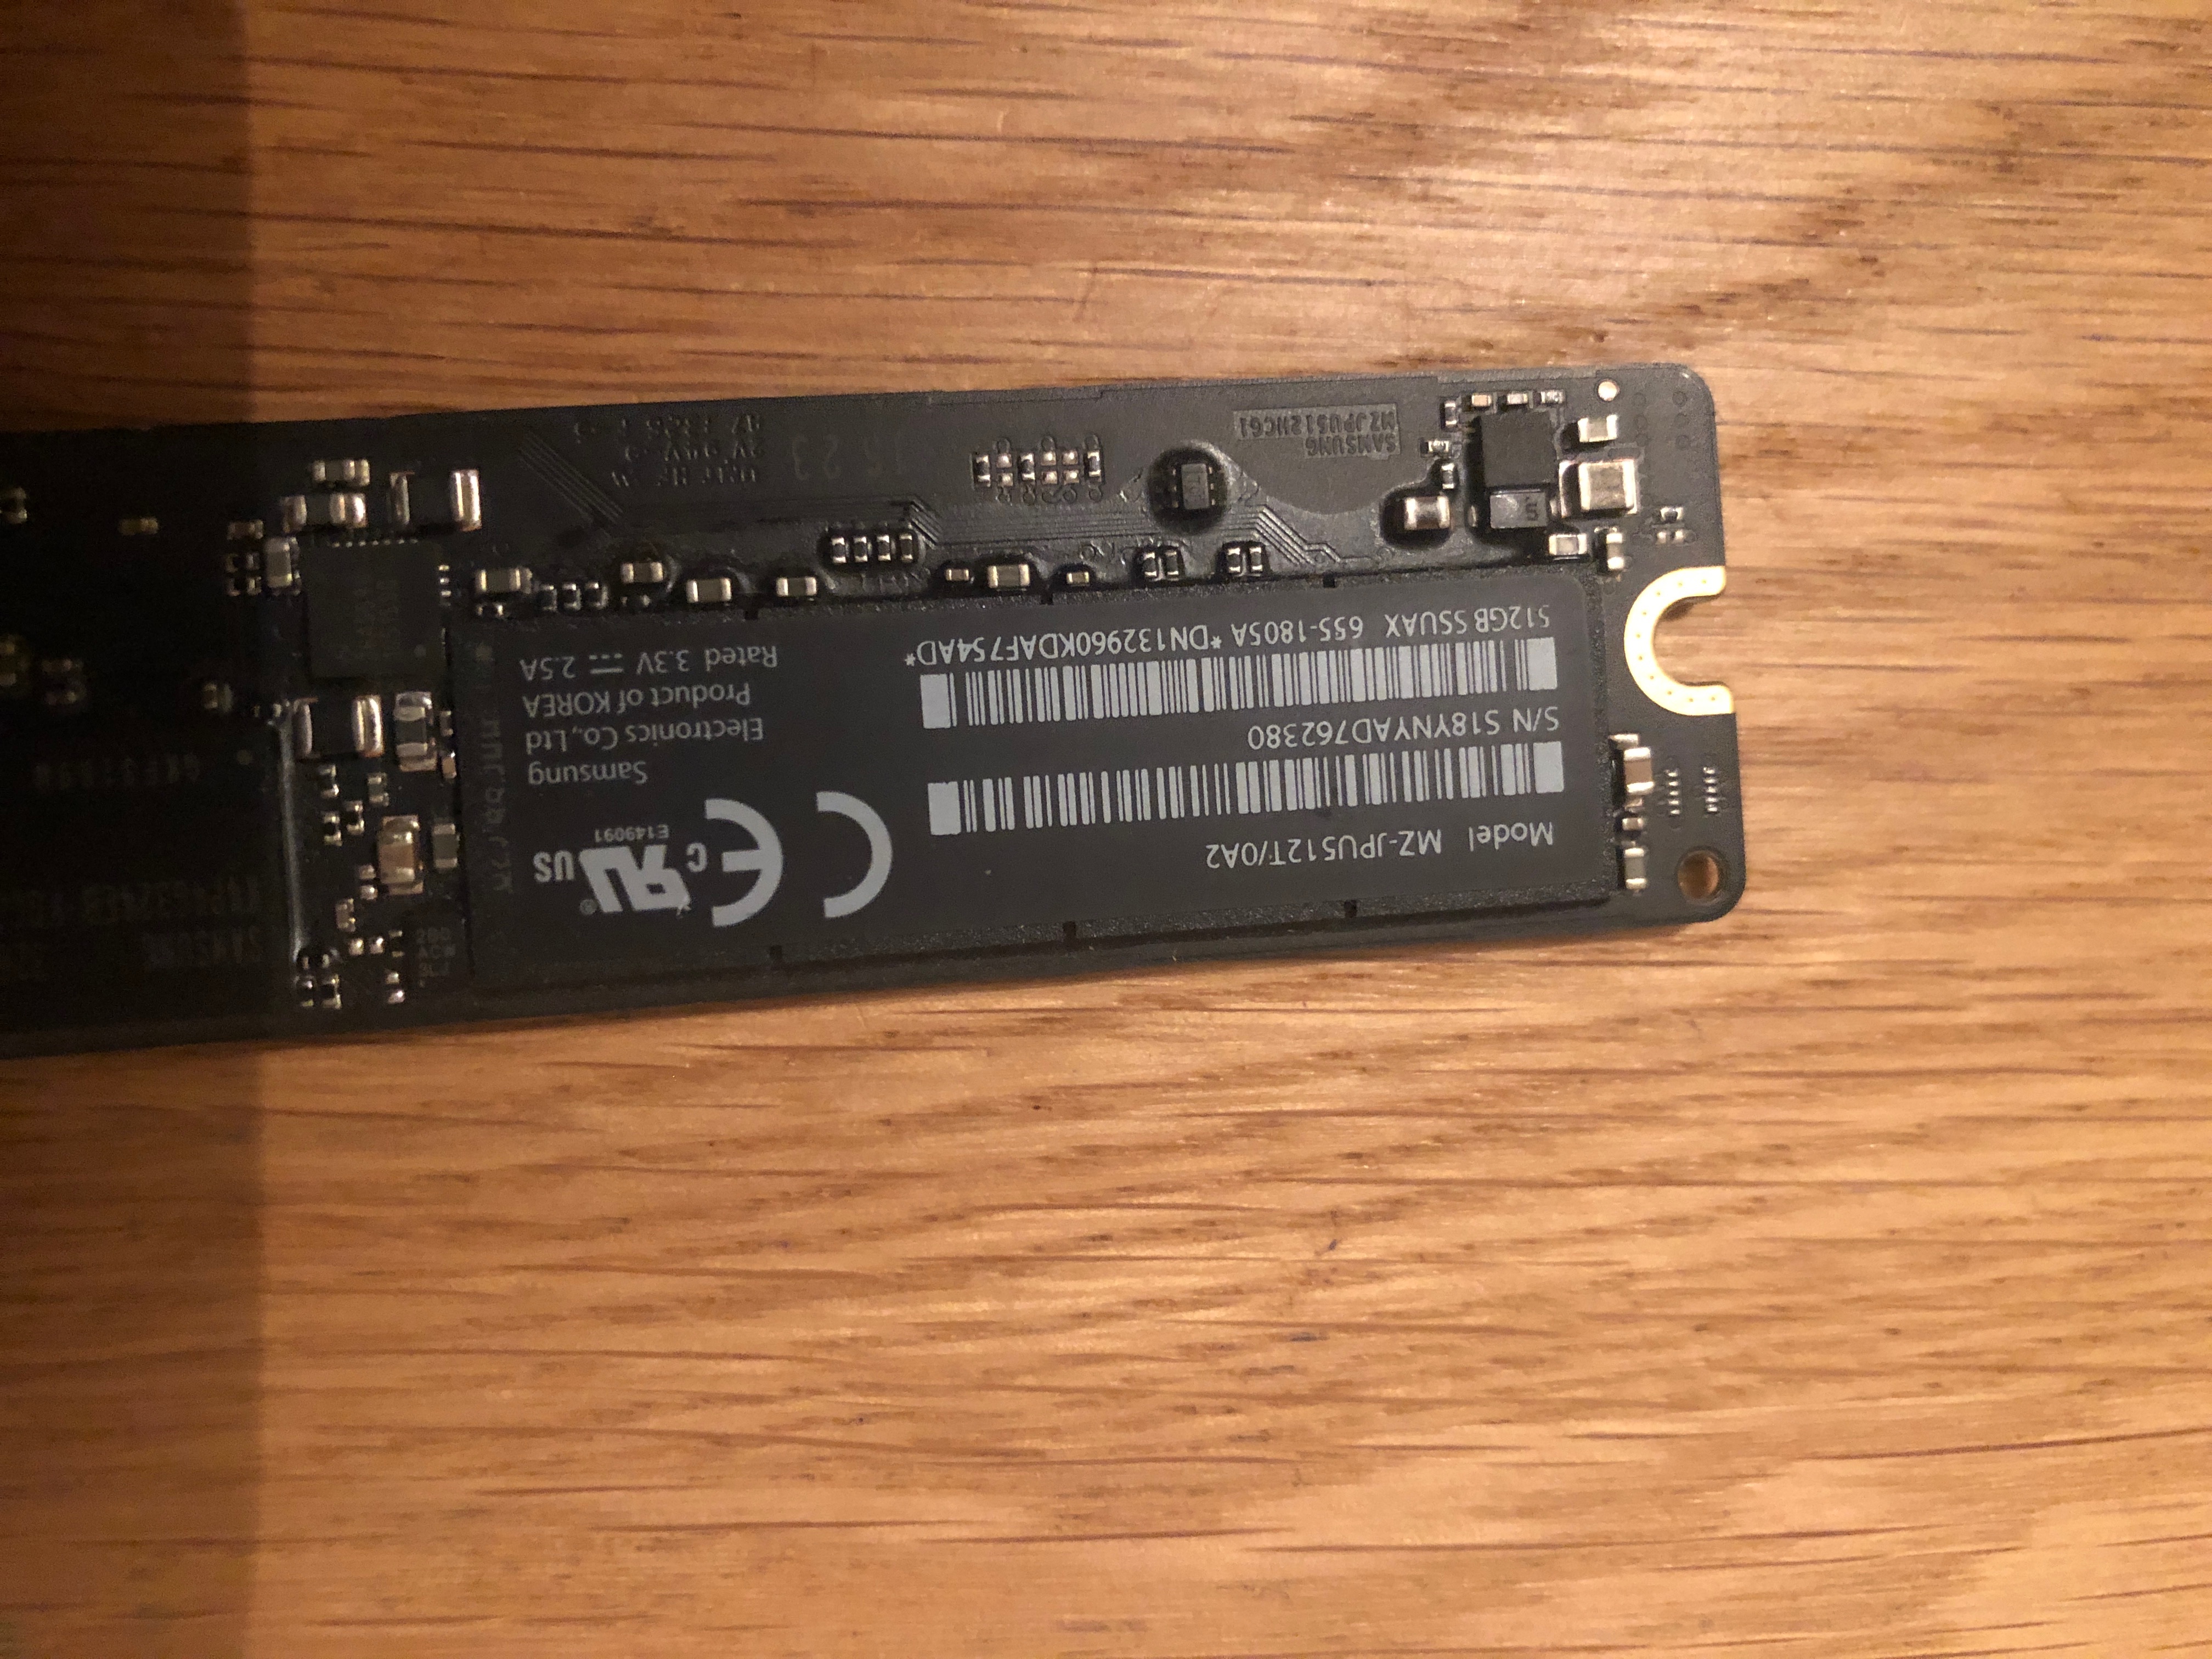 What adapter do I need for this SSD to ge… - Apple Community